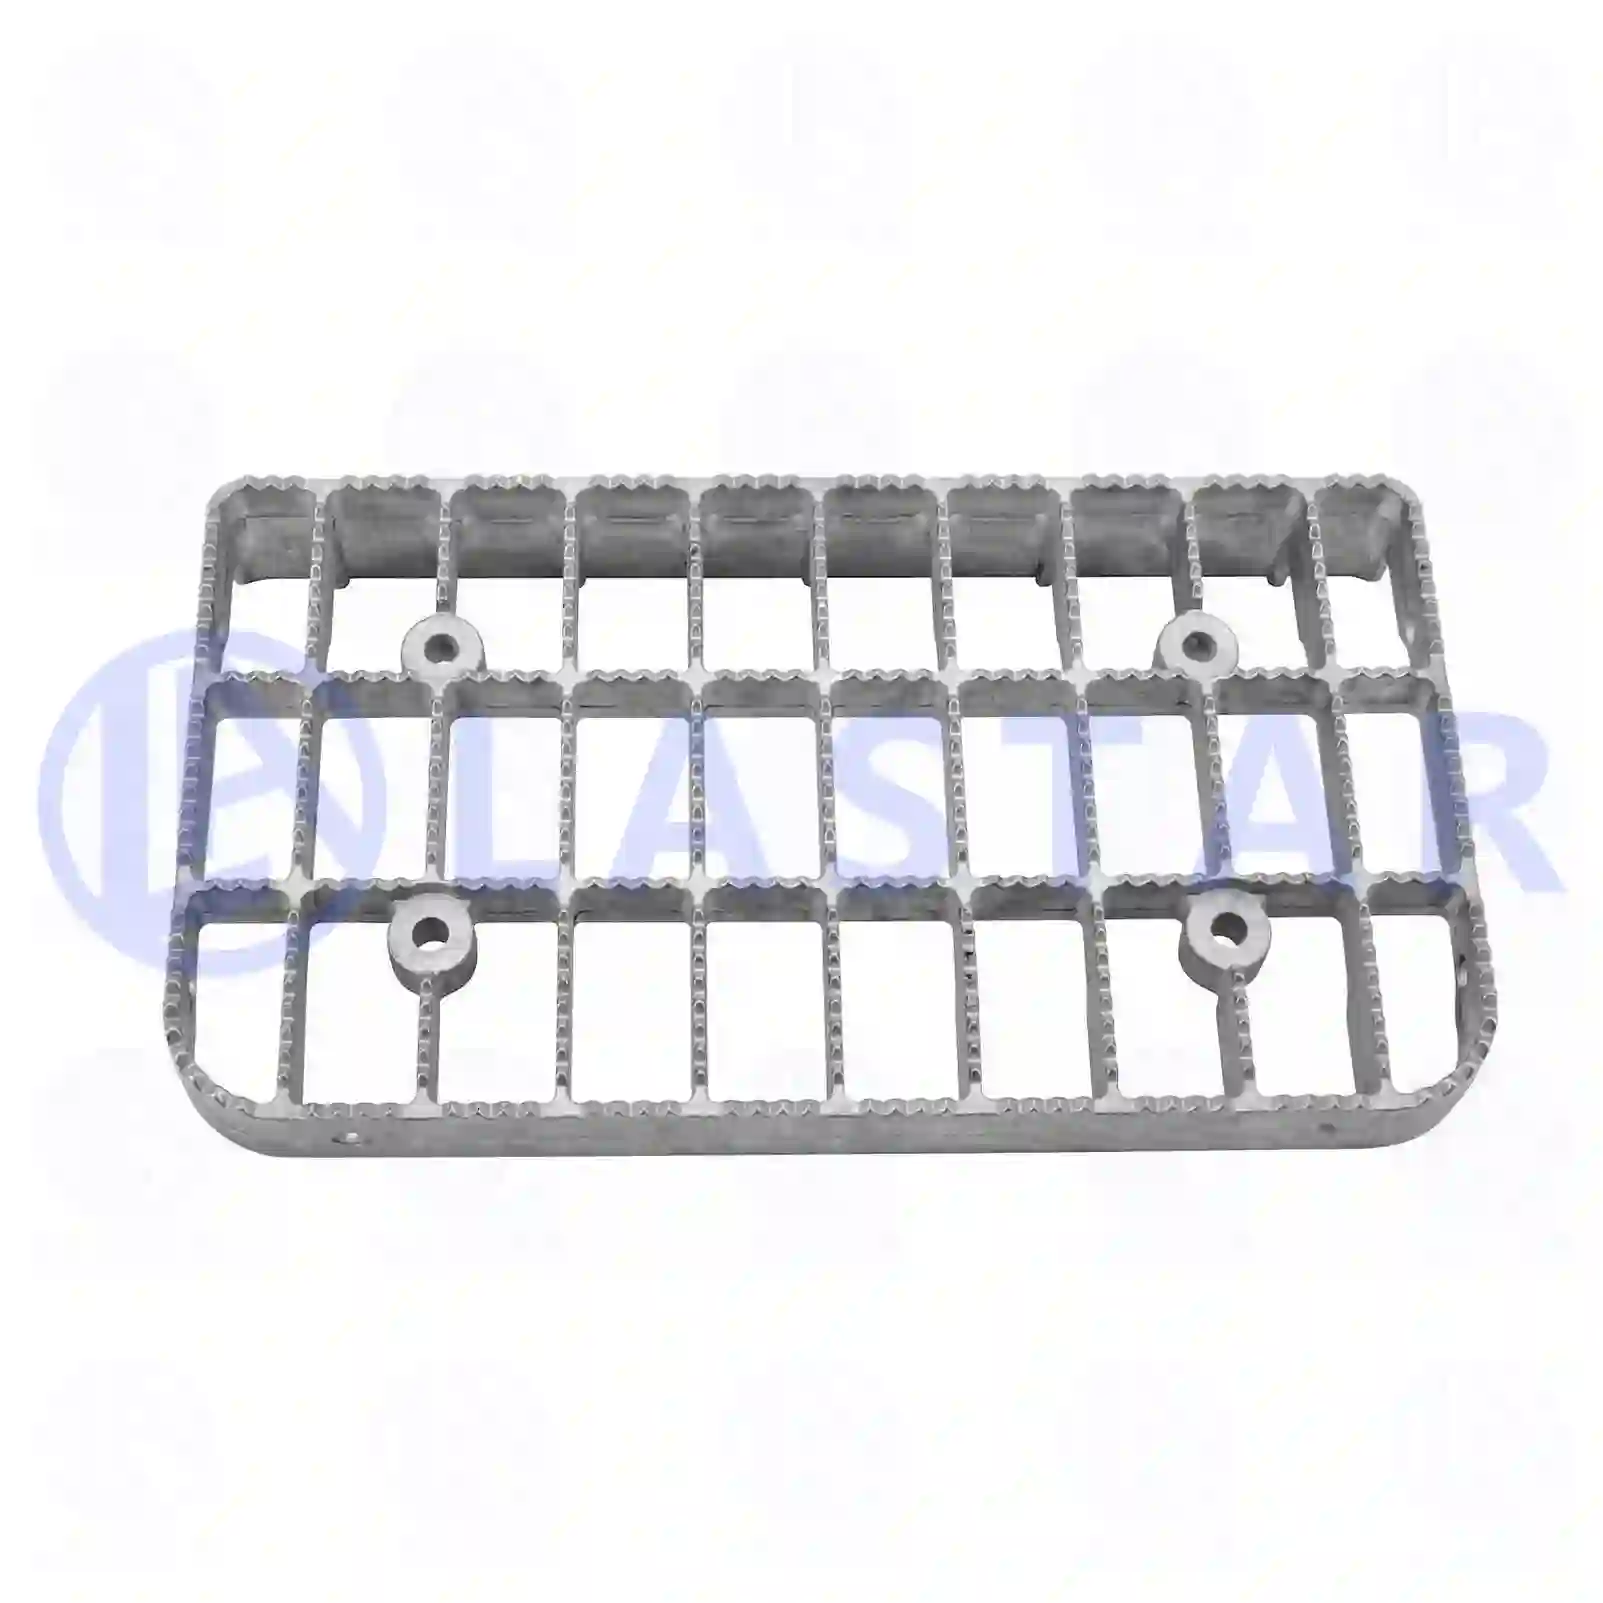 Step, 77717928, 1610896, ZG61122-0008 ||  77717928 Lastar Spare Part | Truck Spare Parts, Auotomotive Spare Parts Step, 77717928, 1610896, ZG61122-0008 ||  77717928 Lastar Spare Part | Truck Spare Parts, Auotomotive Spare Parts